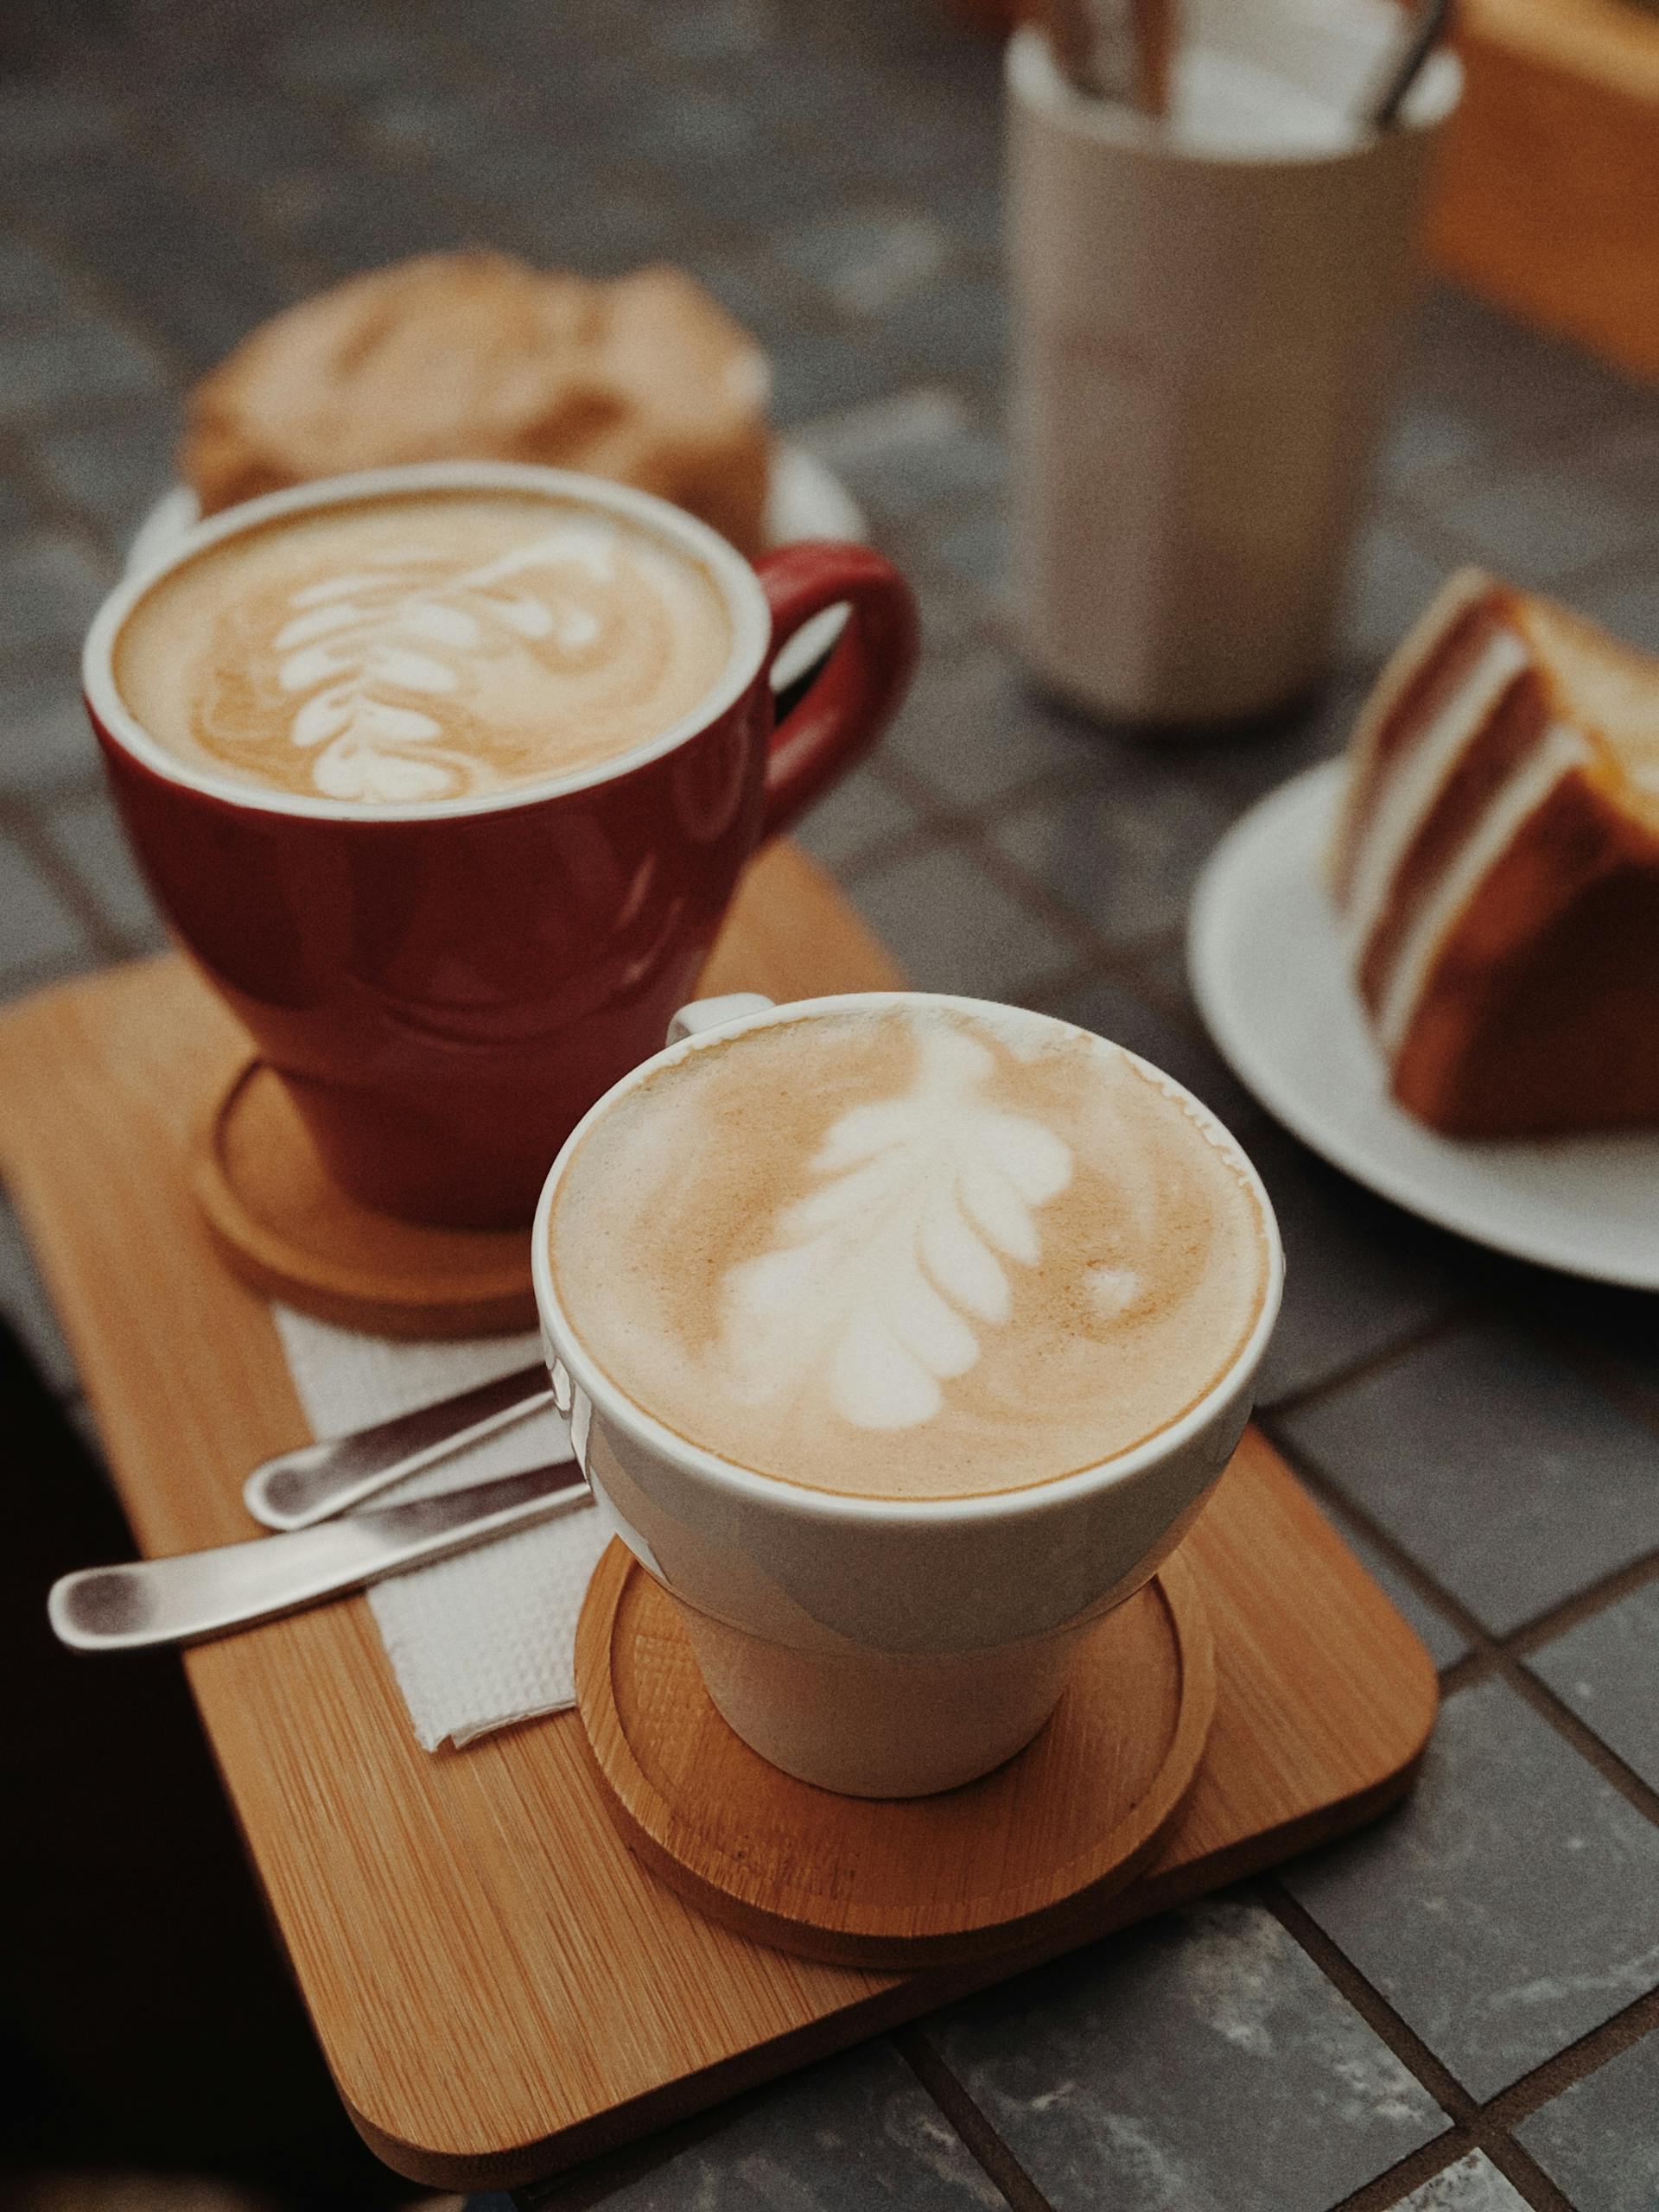 Two cups of brown coffee on top of a brown tray | Source: Pexels